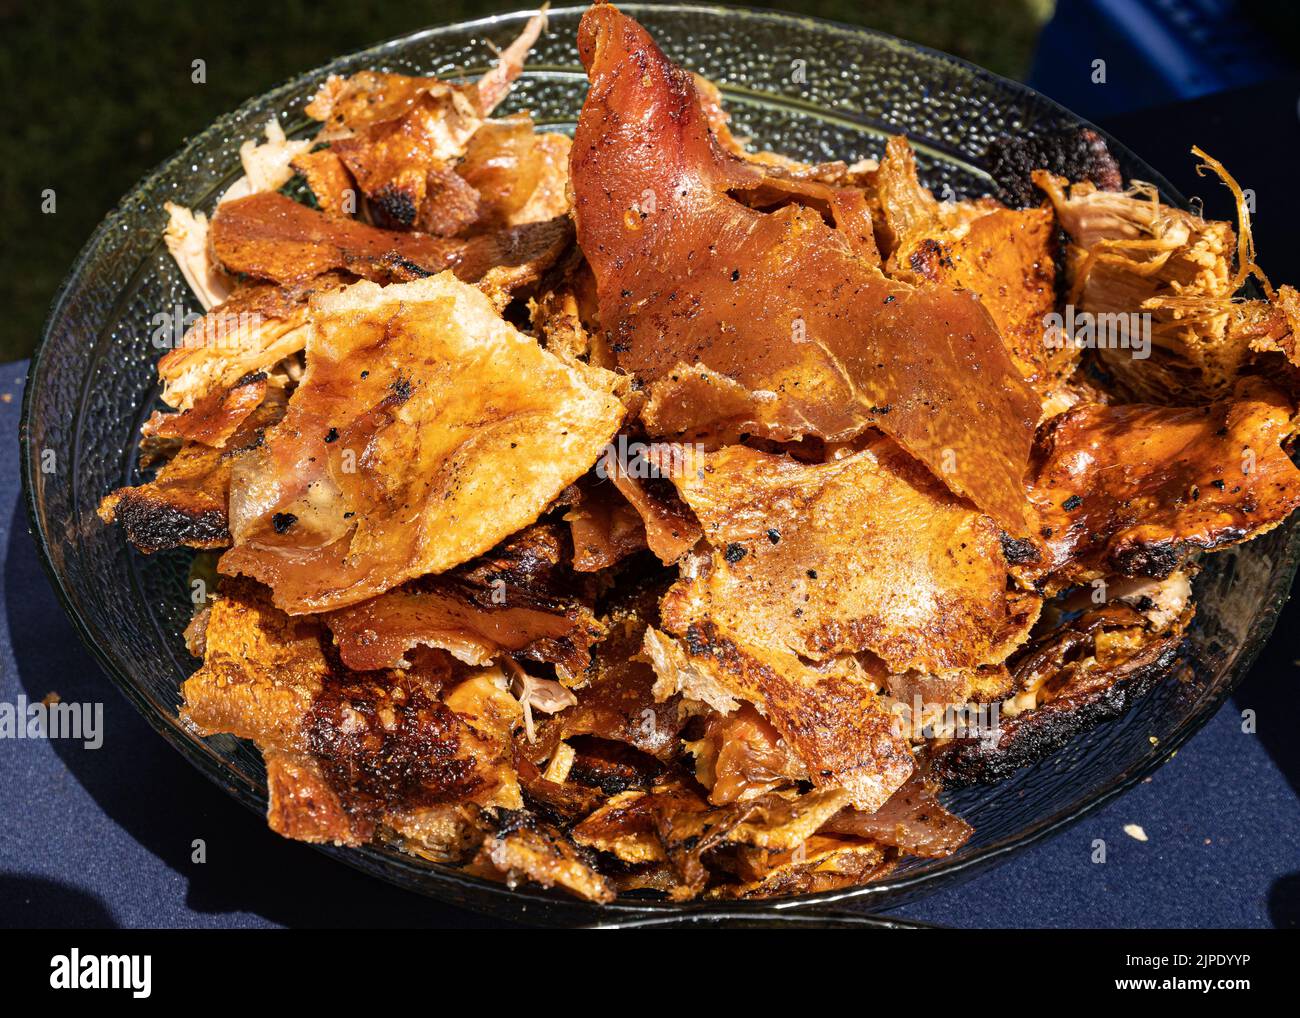 A tray of roasted pork crackling at a hog roast barbecue Stock Photo